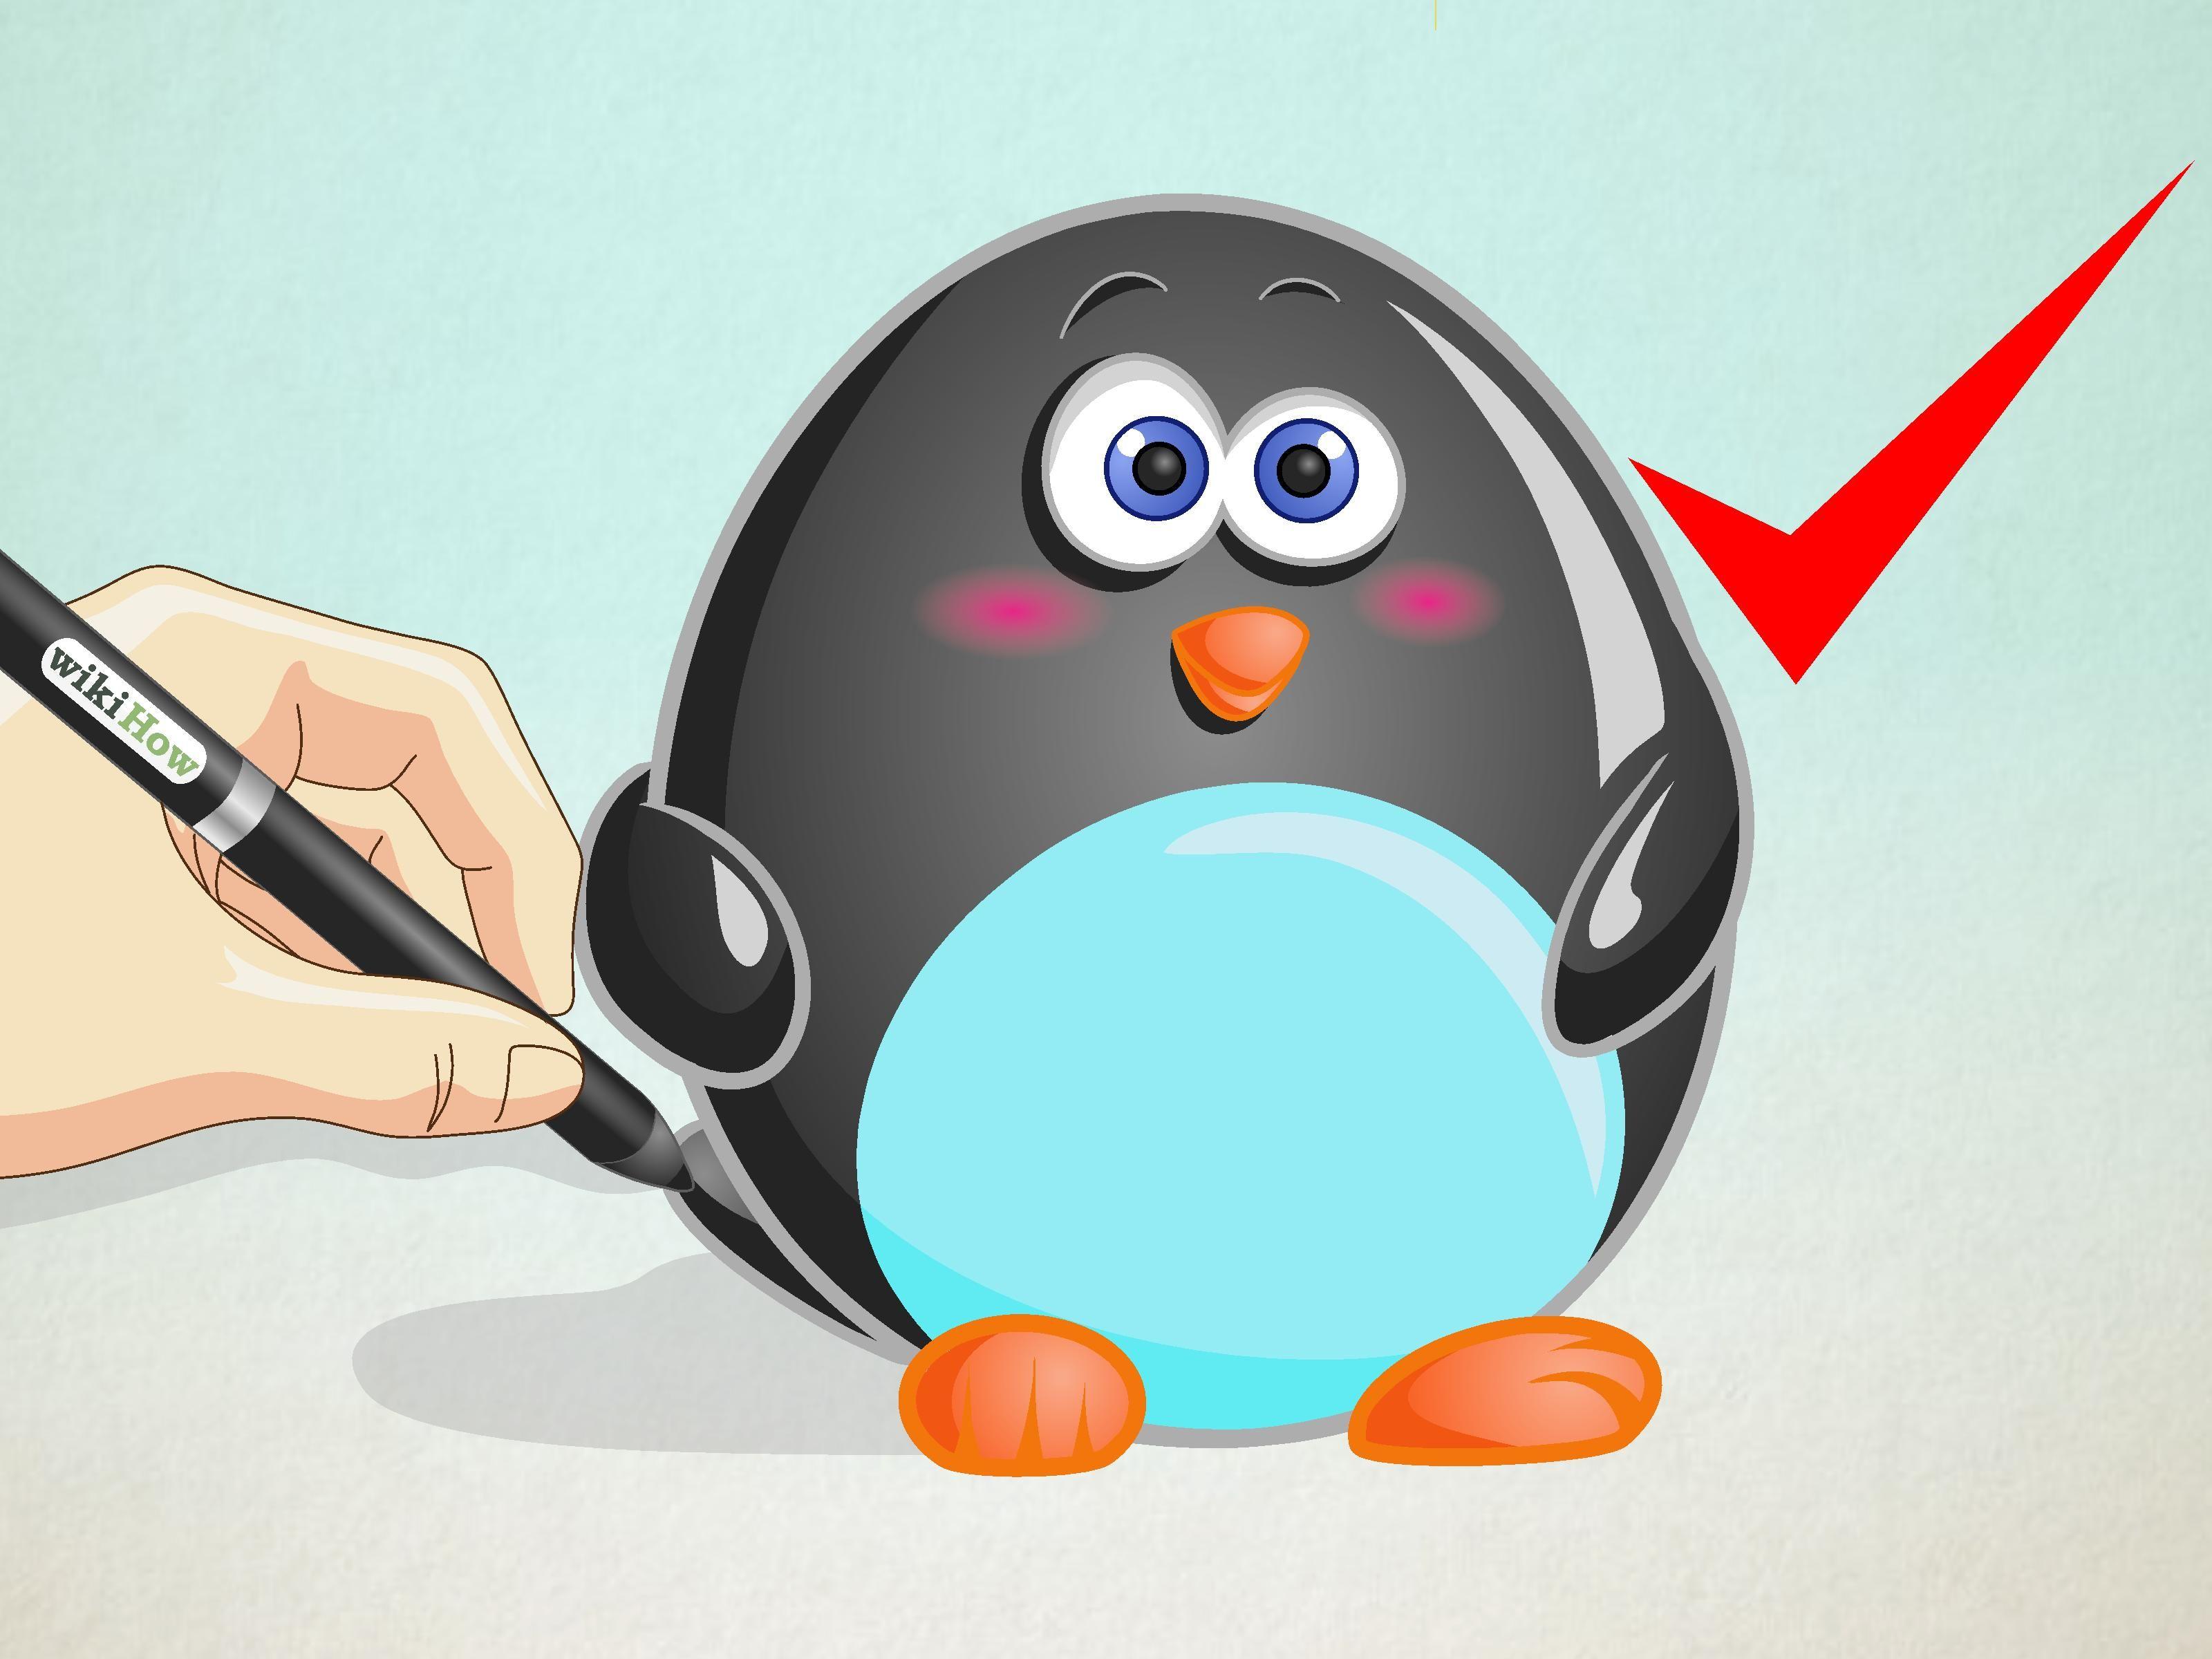 Penguin in Orange Oval Logo - How to Draw a Cartoon Penguin: 13 Steps (with Pictures) - wikiHow